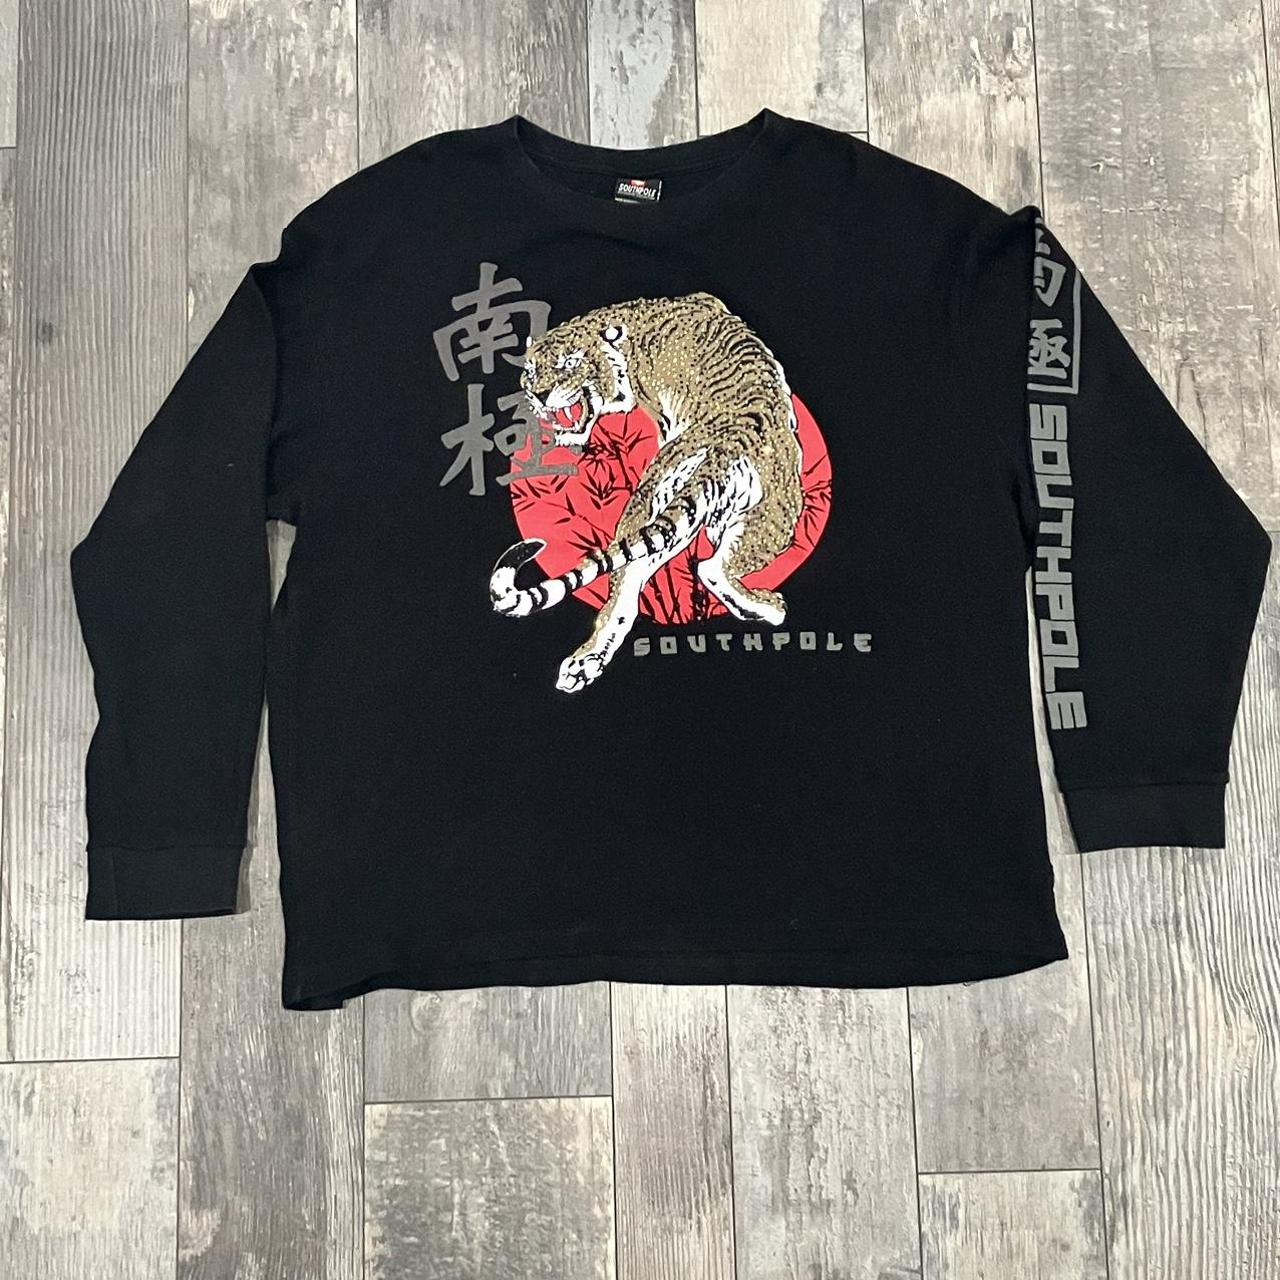 Southpole knitted Tiger Long sleeve Size: 3XL 📍... - Depop